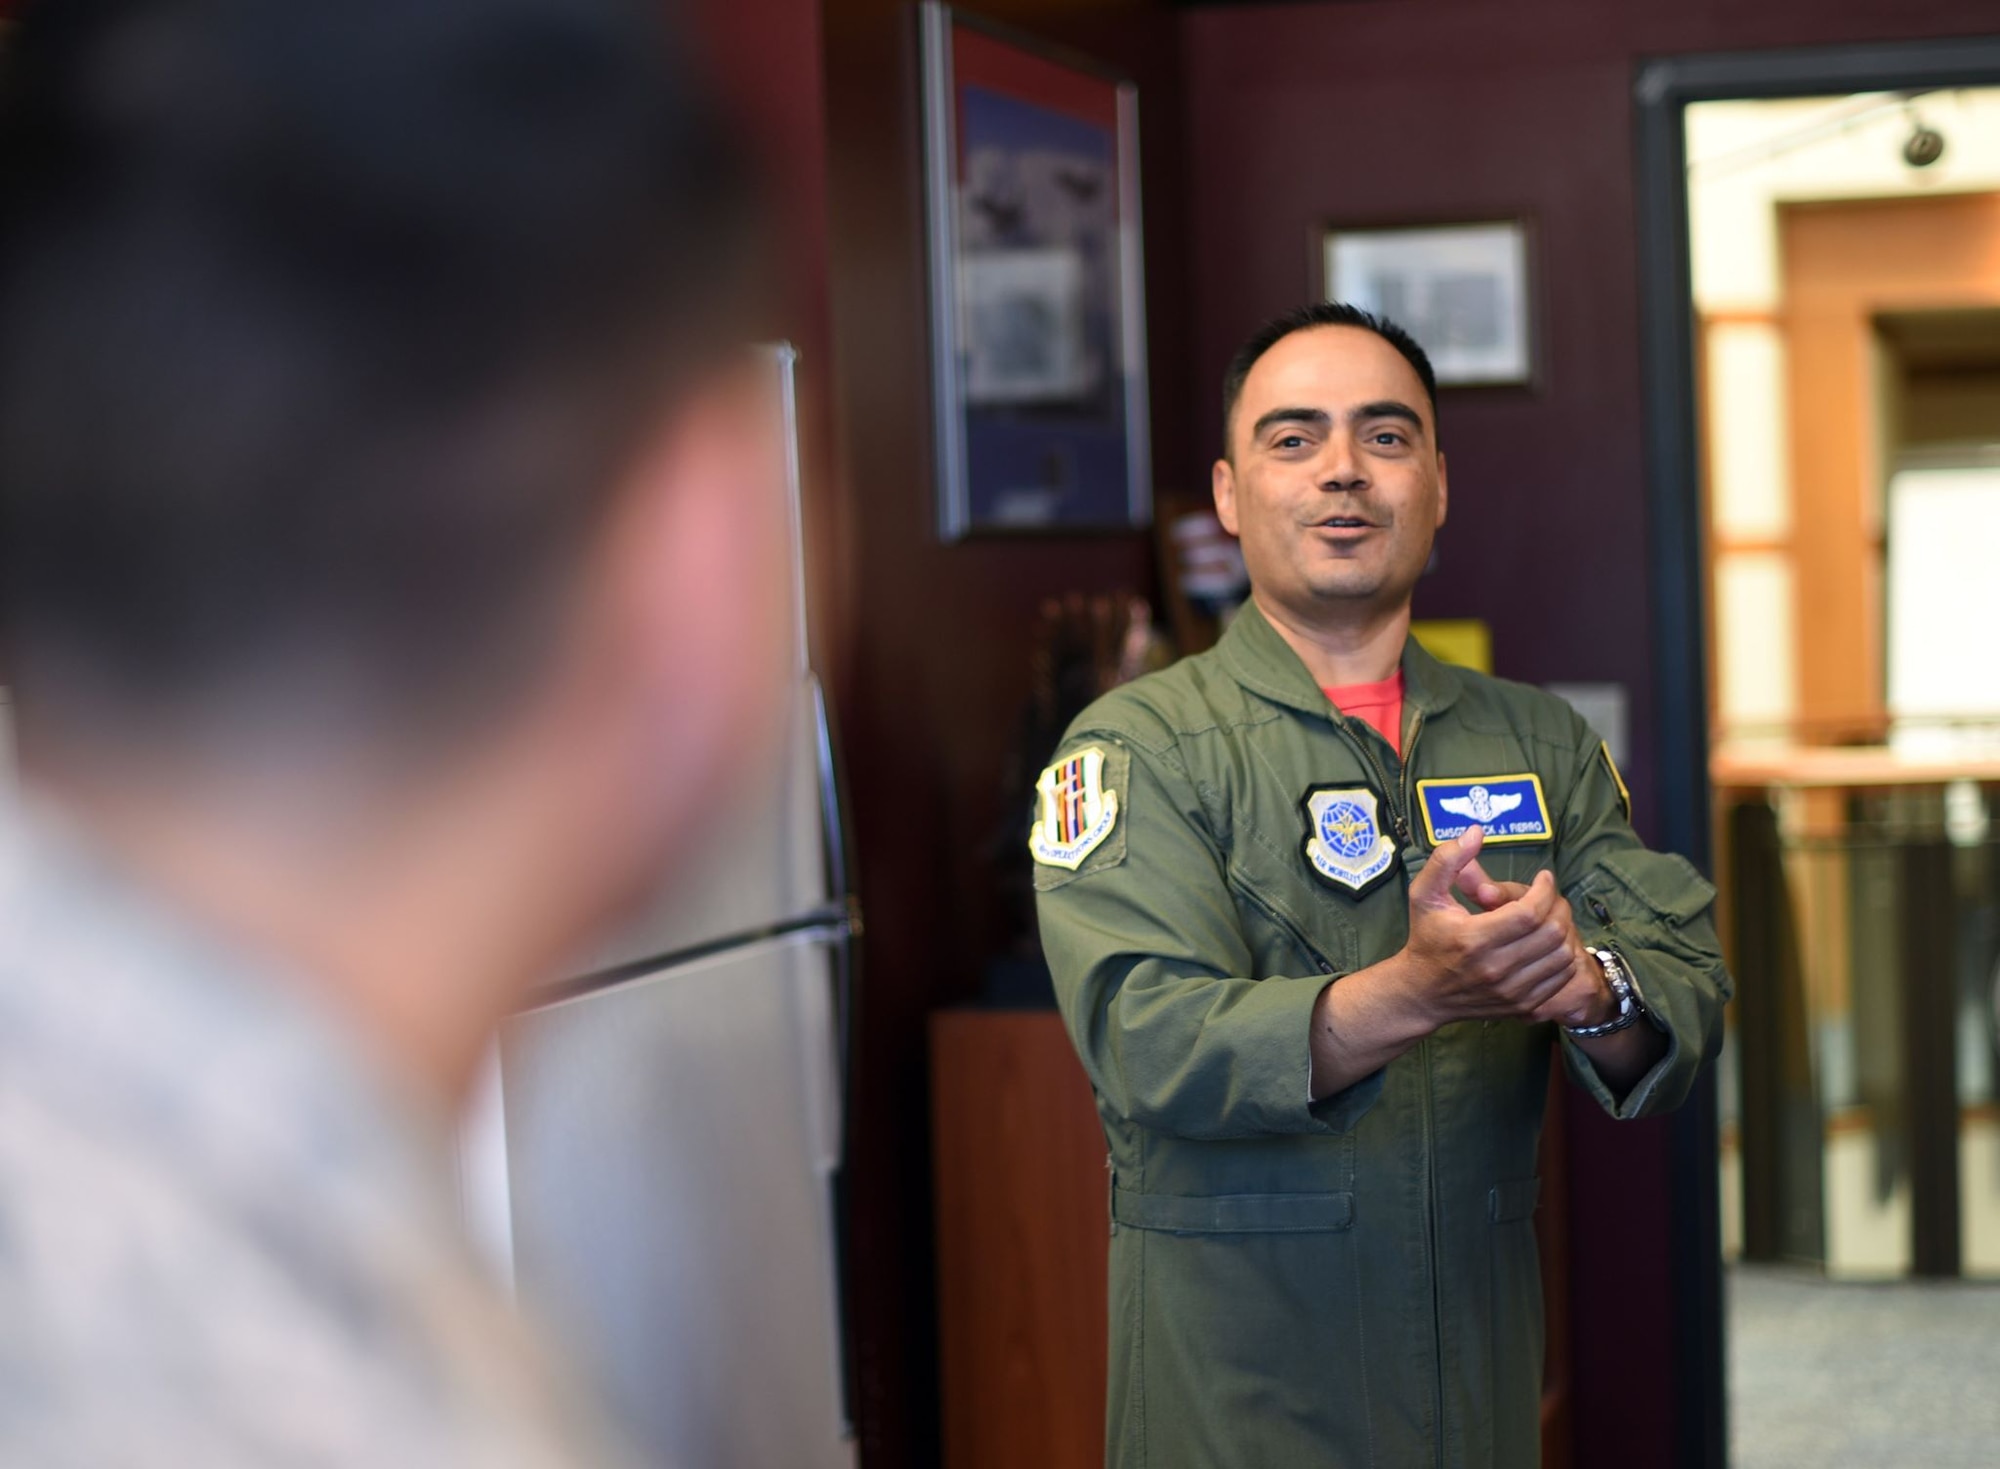 U.S. Air Force Chief Master Sgt. Erick Fierro, 9th Air Refueling Squadron superintendent, right, answers a question from Tech. Sgt. Adrian Perez, 60th Medical Support Squadron Client Service Center technician, left, during an Airman enrichment day June 14, 2019, at Travis Air Force Base, California. The Airman enrichment day was the first of its kind in the Air Force and exposed Airmen of different Travis units to the jobs and mission contributions of other Air Force jobs. (U.S. Air Force photo by Senior Airman Christian Conrad)